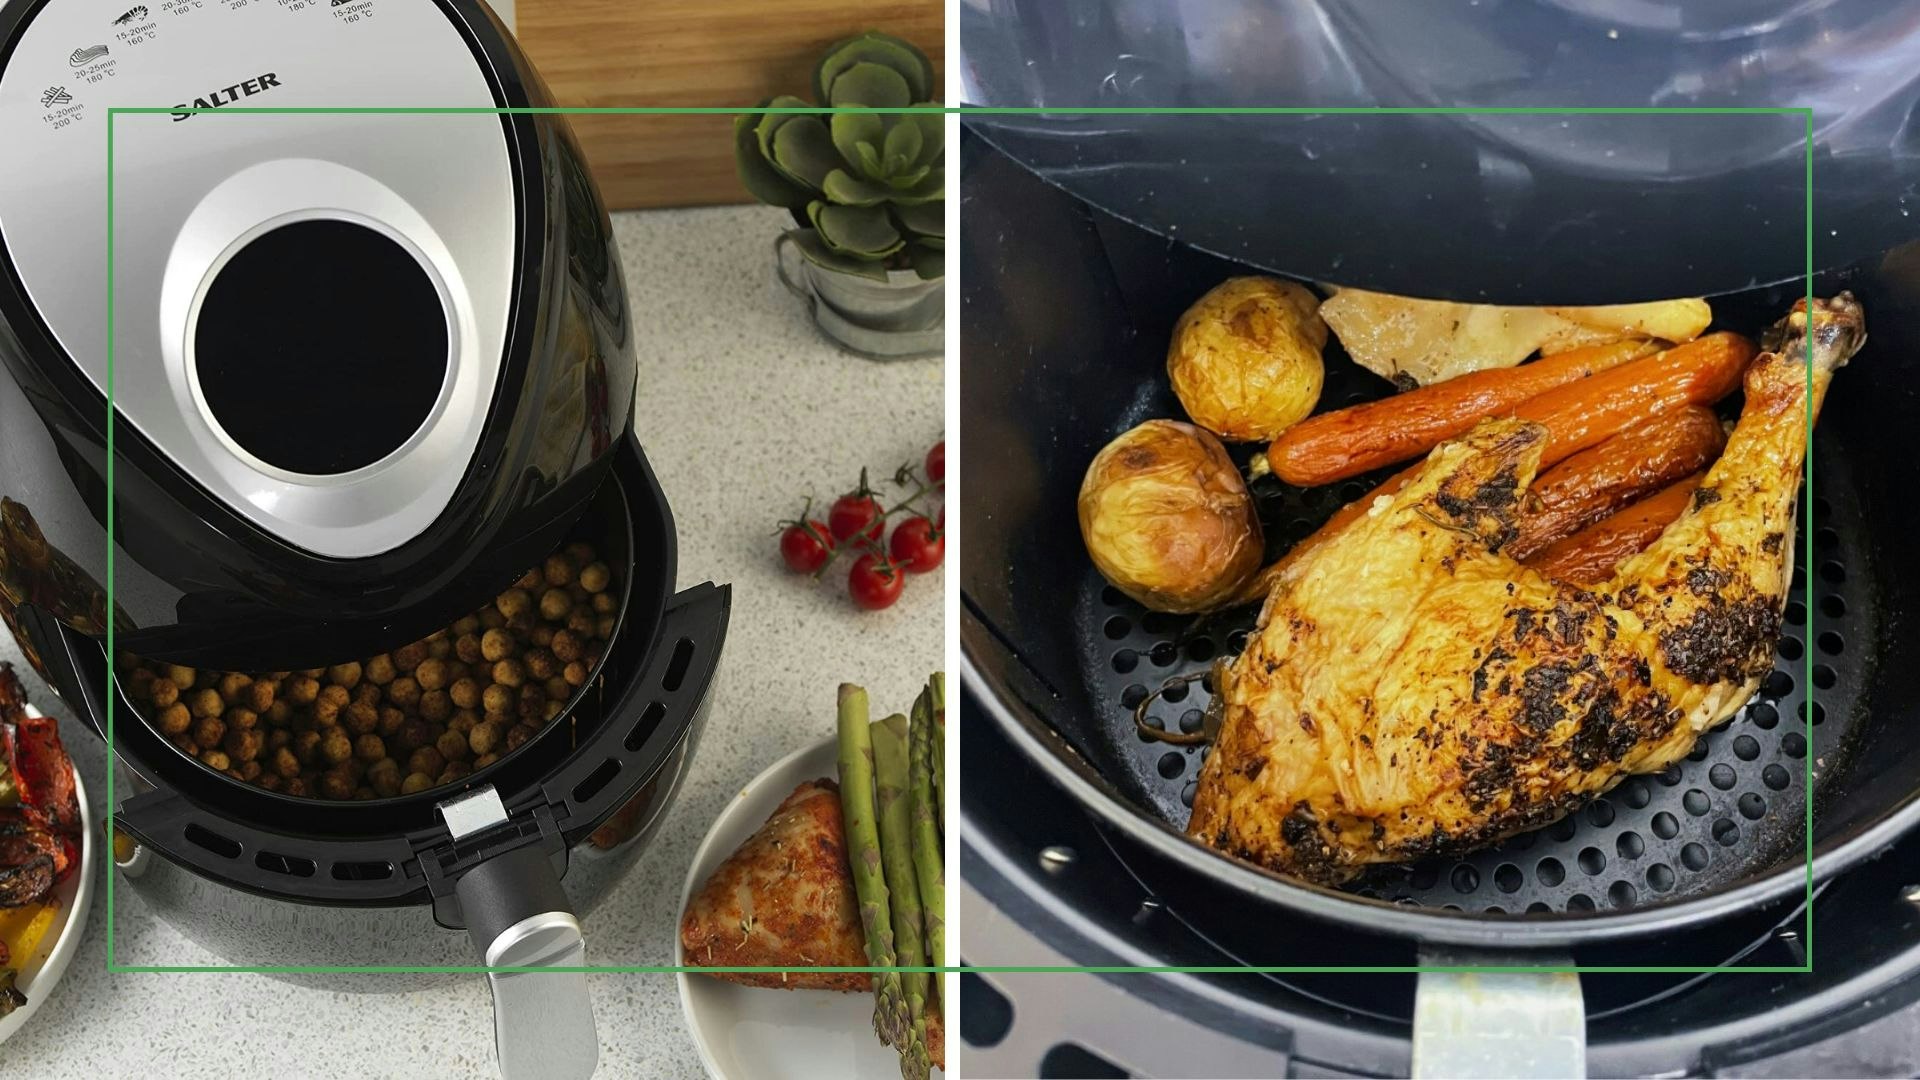 Best Air Fryer With Dehydrator - Also The Crumbs Please